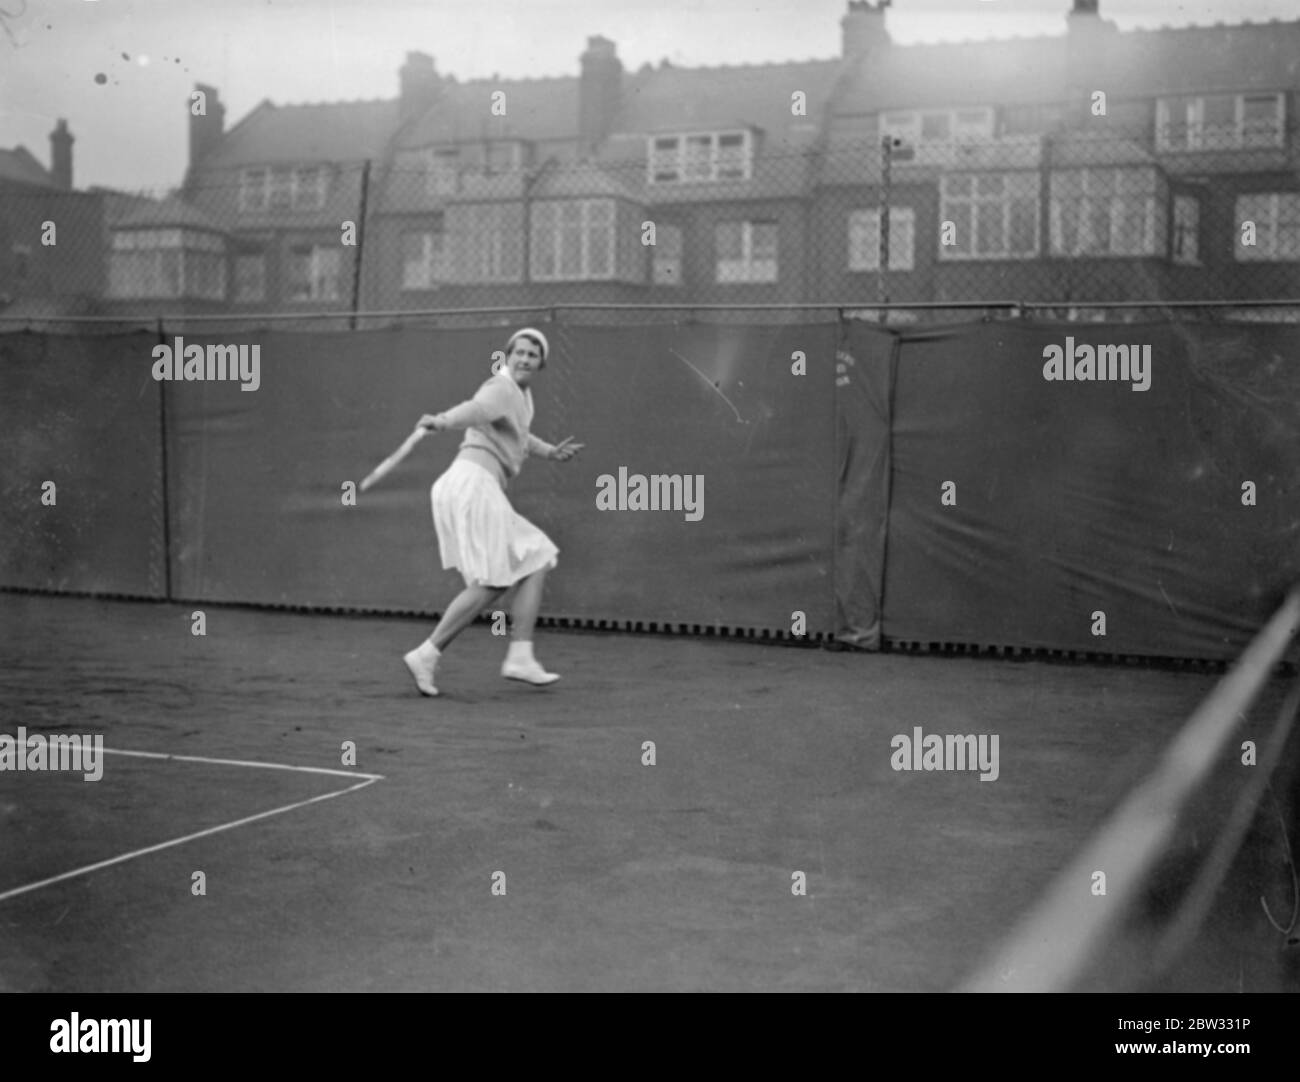 Hampstead hard courts tennis tournament opens . The Hampstead hard courts tennis tournament opend in brilliant weather . Miss Caldwell playing a backhand shot during the tournament . 21 March 1932 Stock Photo